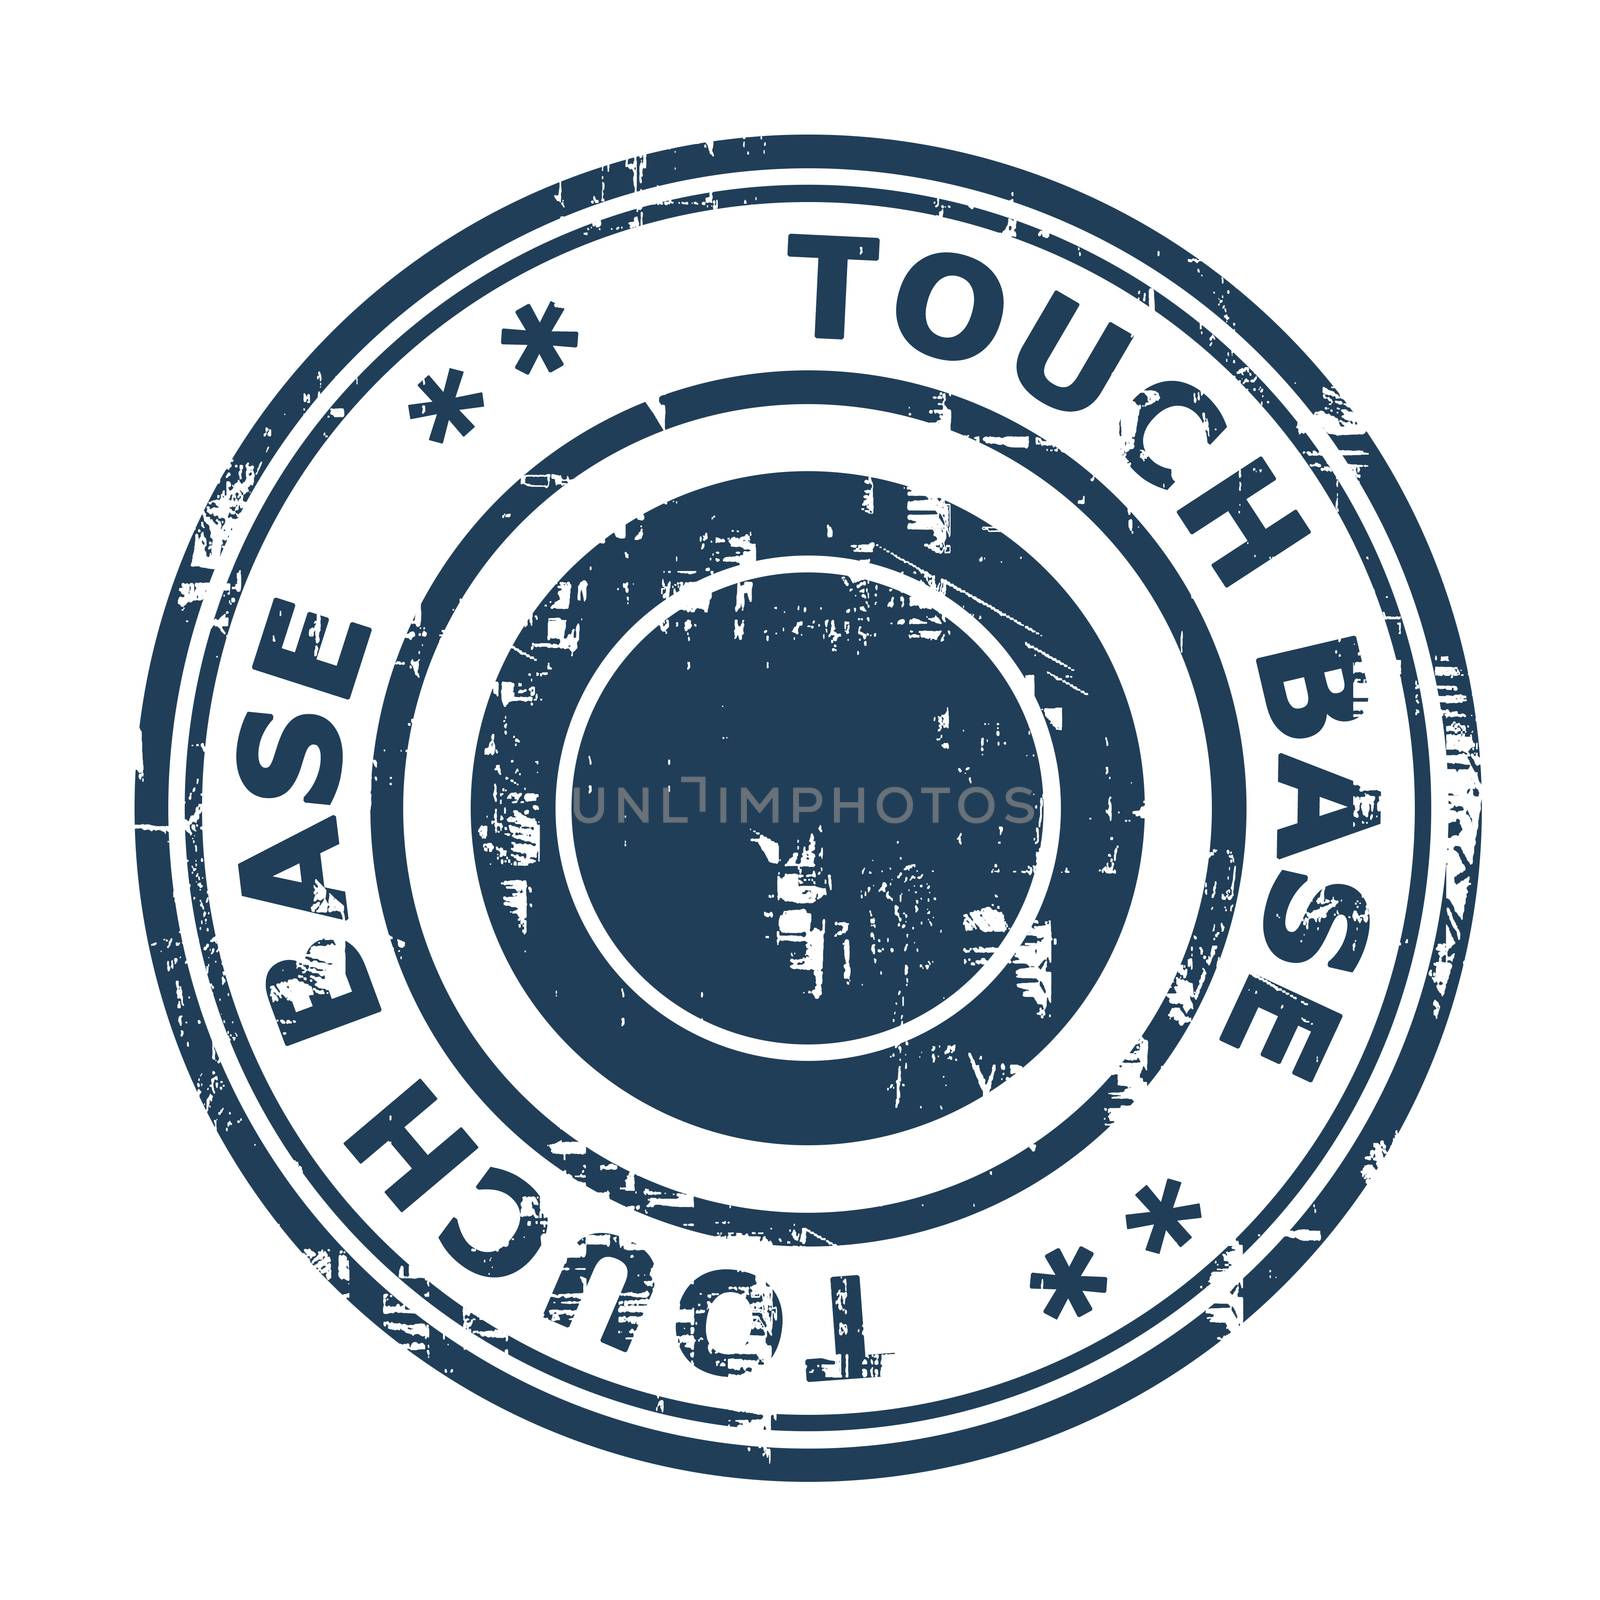 Touch base business concept rubber stamp isolated on a white background.